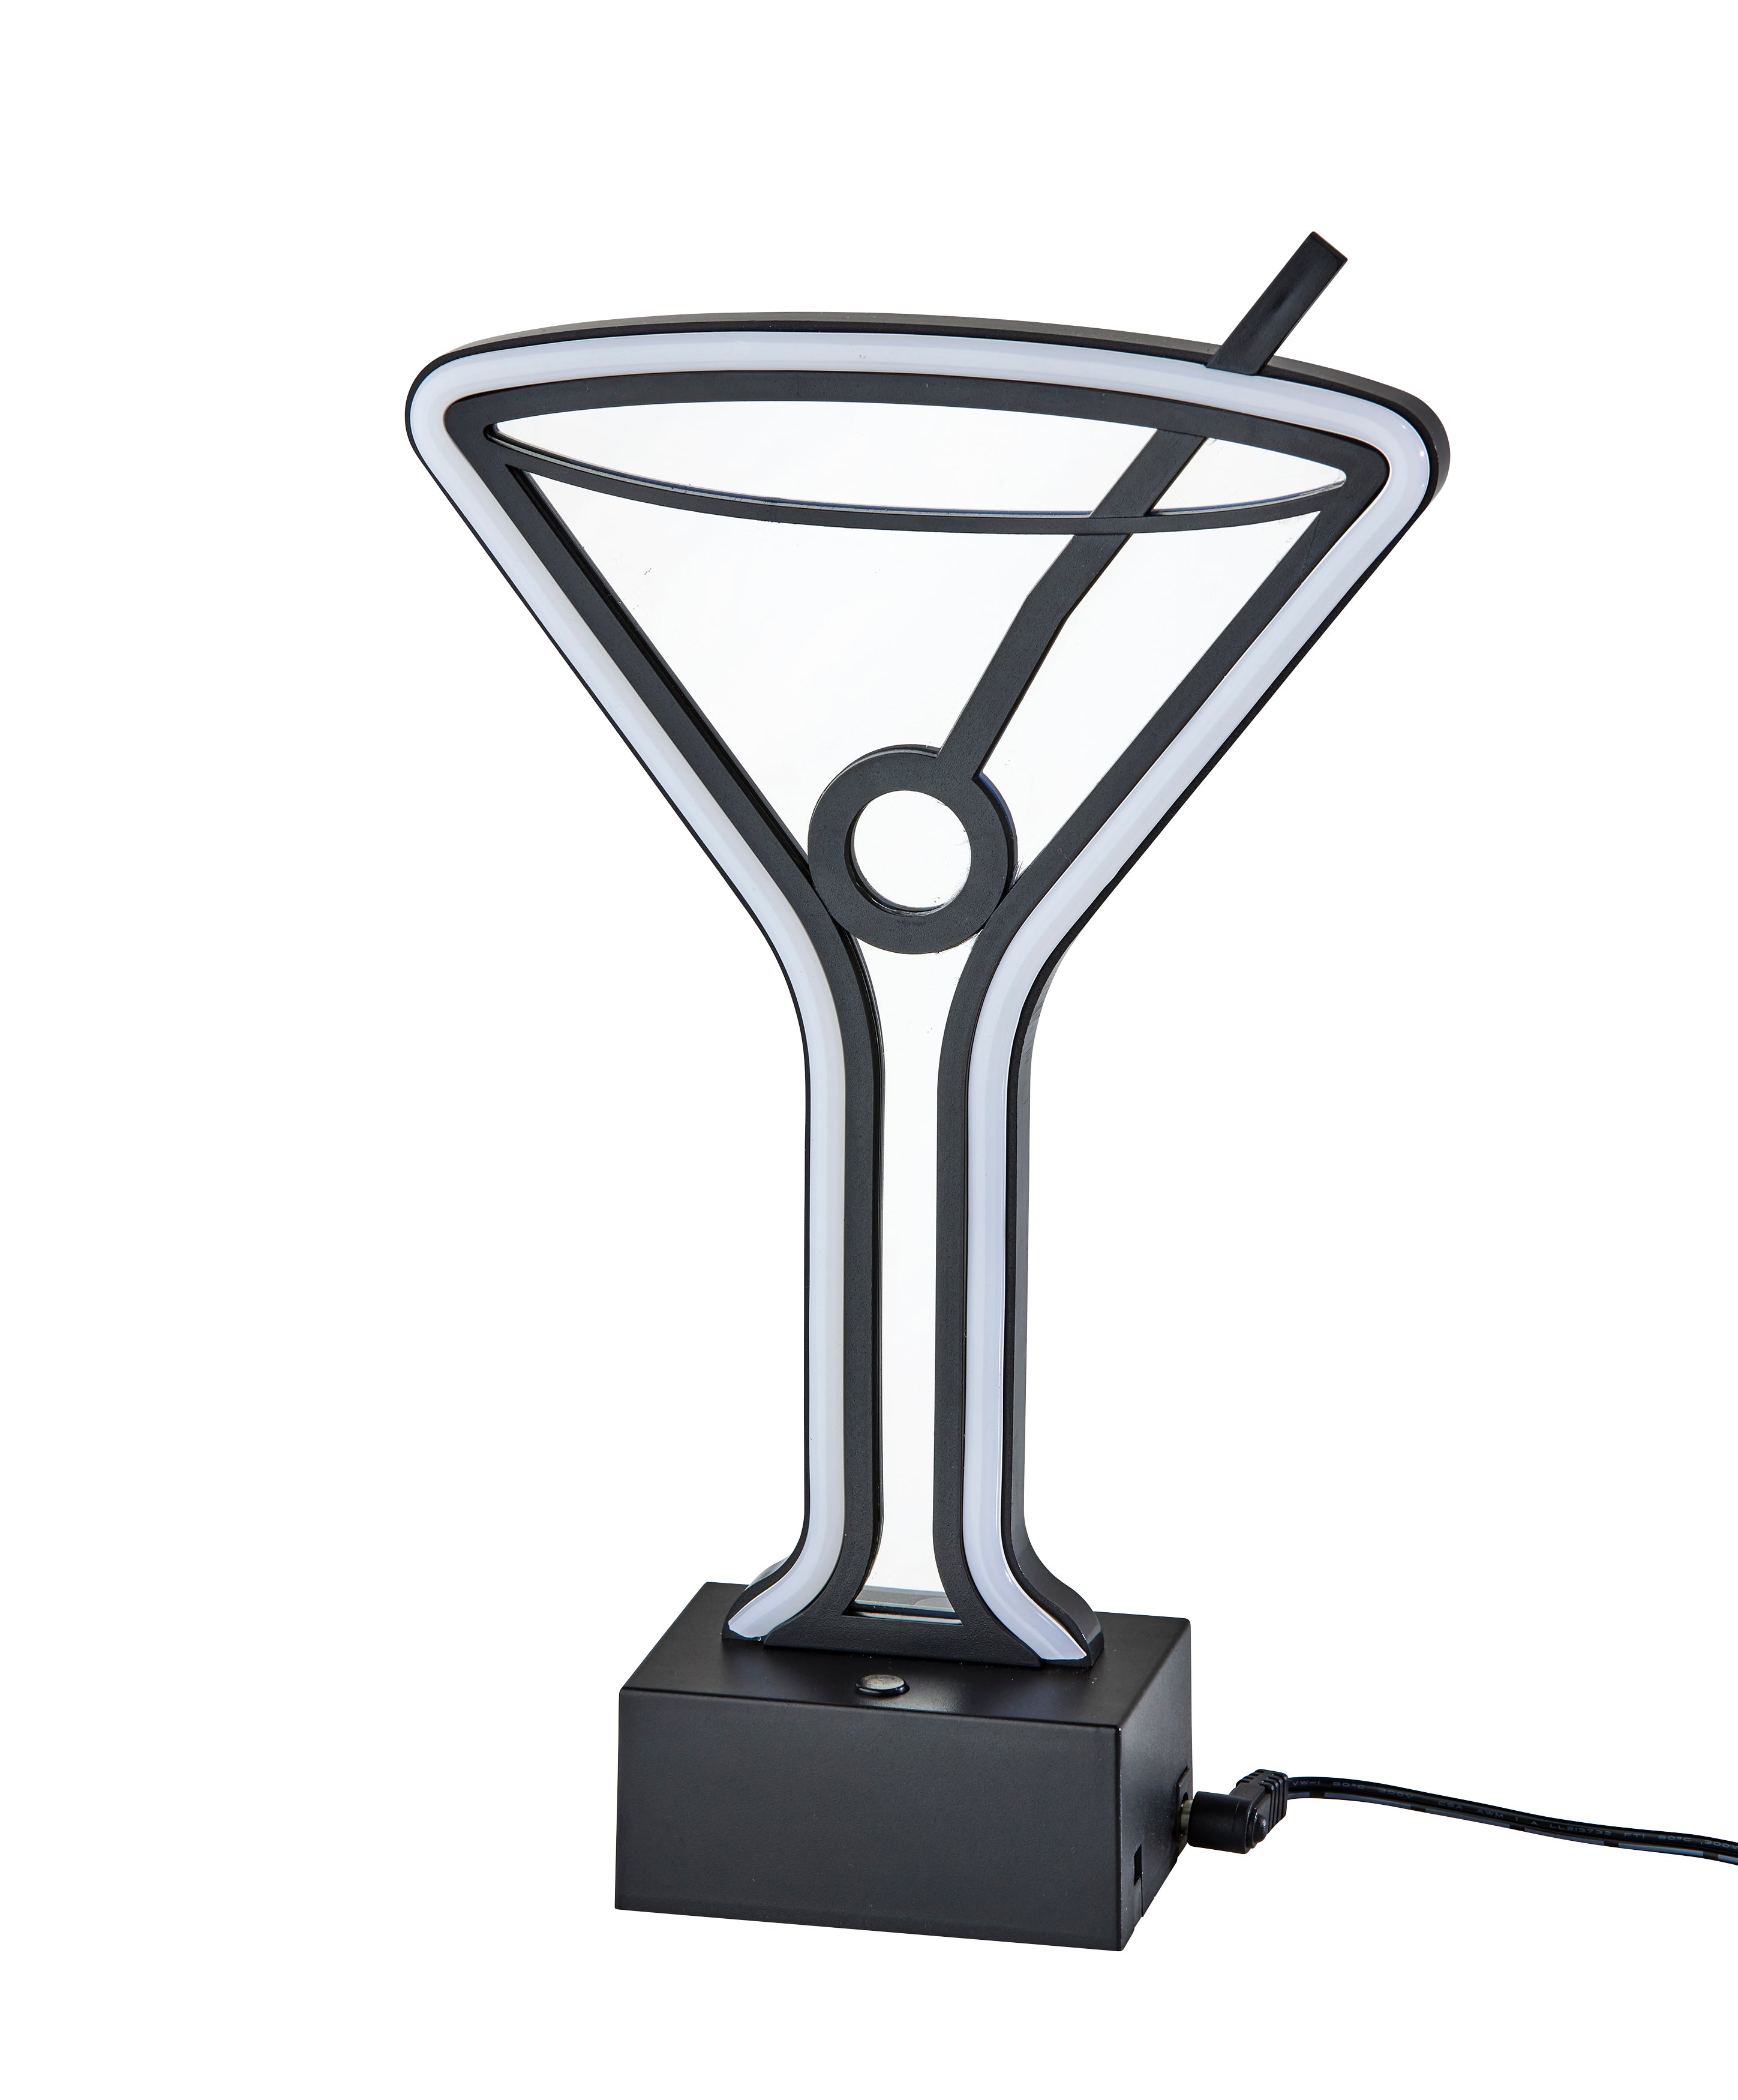 NEON Table lamp Black INTEGRATED LED - SL3718-01 | ADESSO